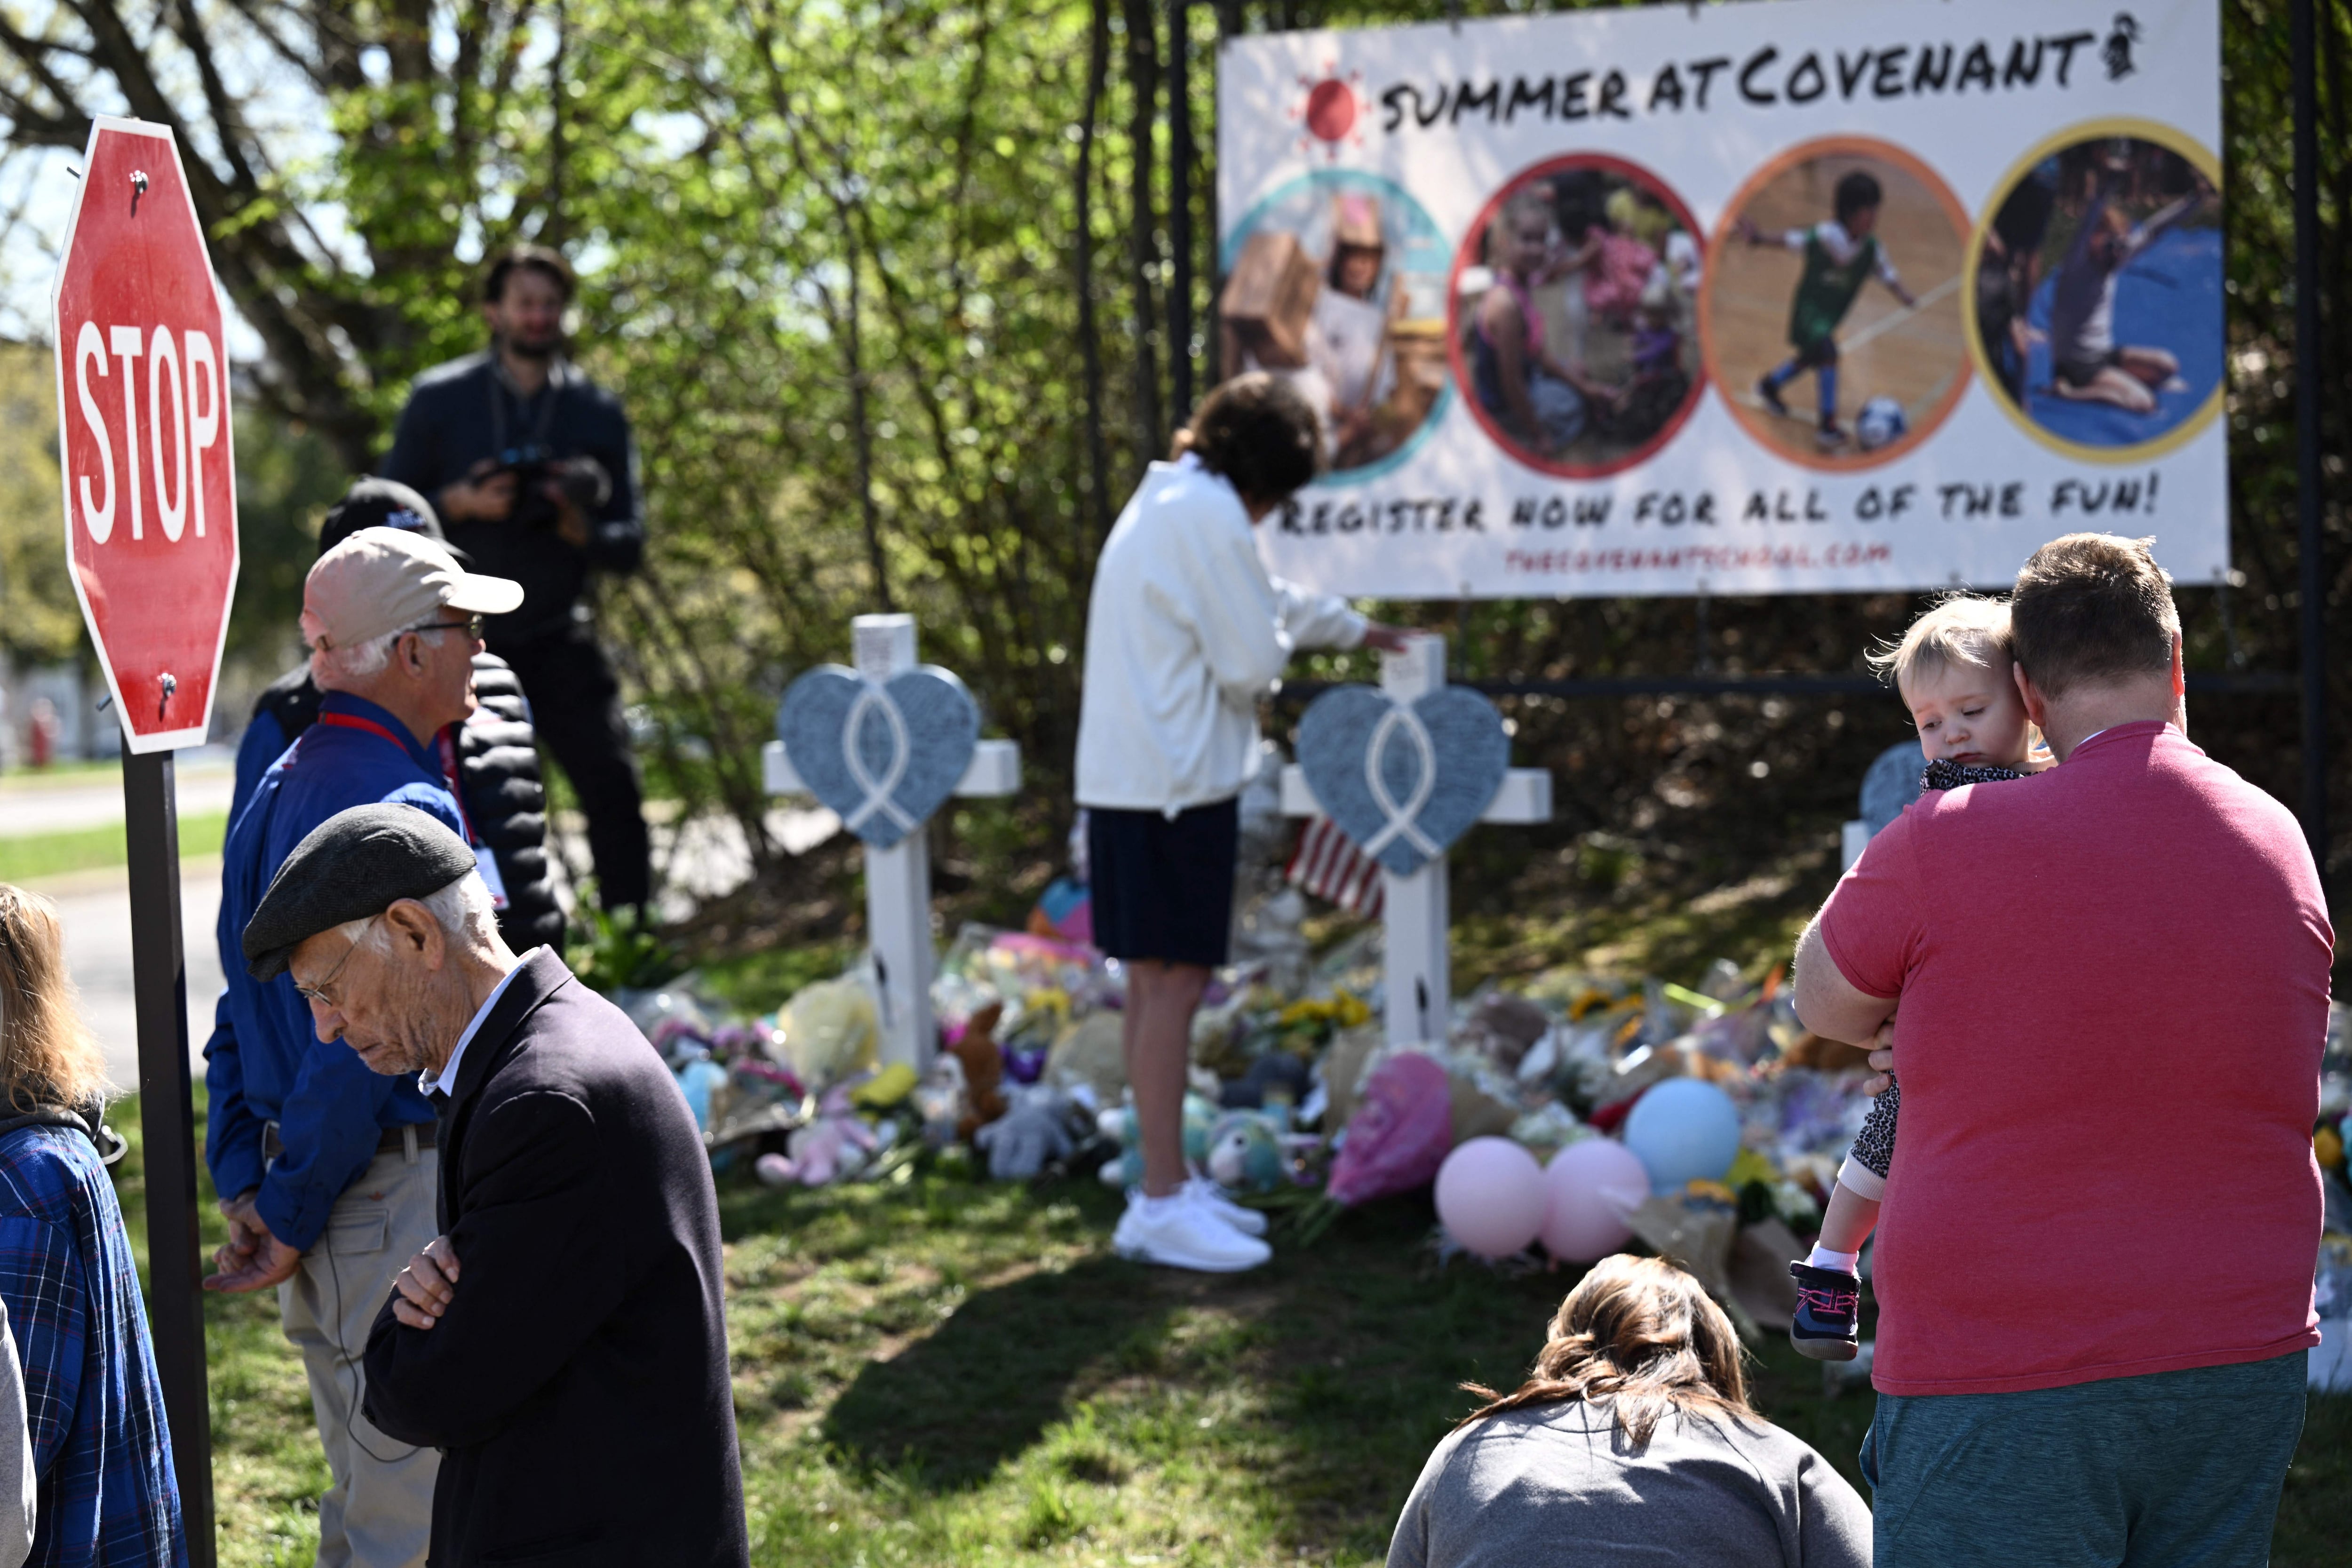 People stand near a makeshift roadside memorial. One man holds a child.